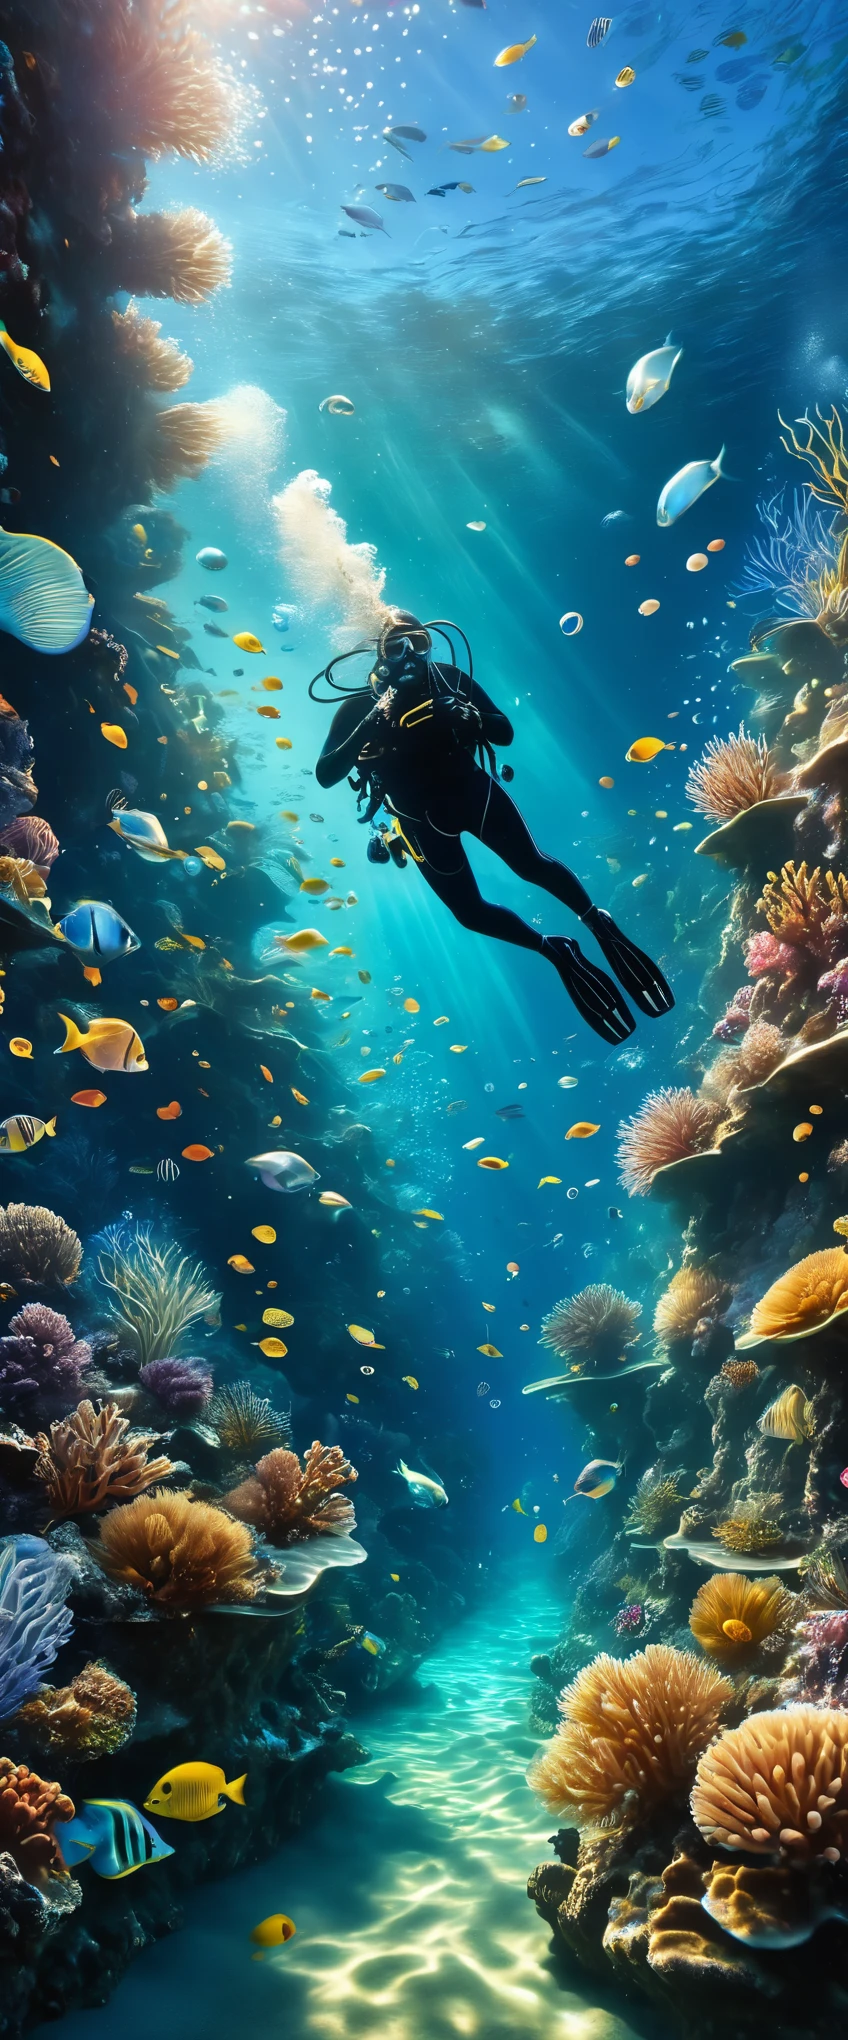 Photos under the sea,Draw a beautiful underwater world,Best diving spots,Transparency,How beautiful,Water representation,Water movement,Fine air bubbles,realism,Beautiful diving spots that will captivate everyone,bright,Diagonal composition,Focus on the Underwater World,Photorealistic,Intricate underwater details,Fantasy,Dreamy,1 diver